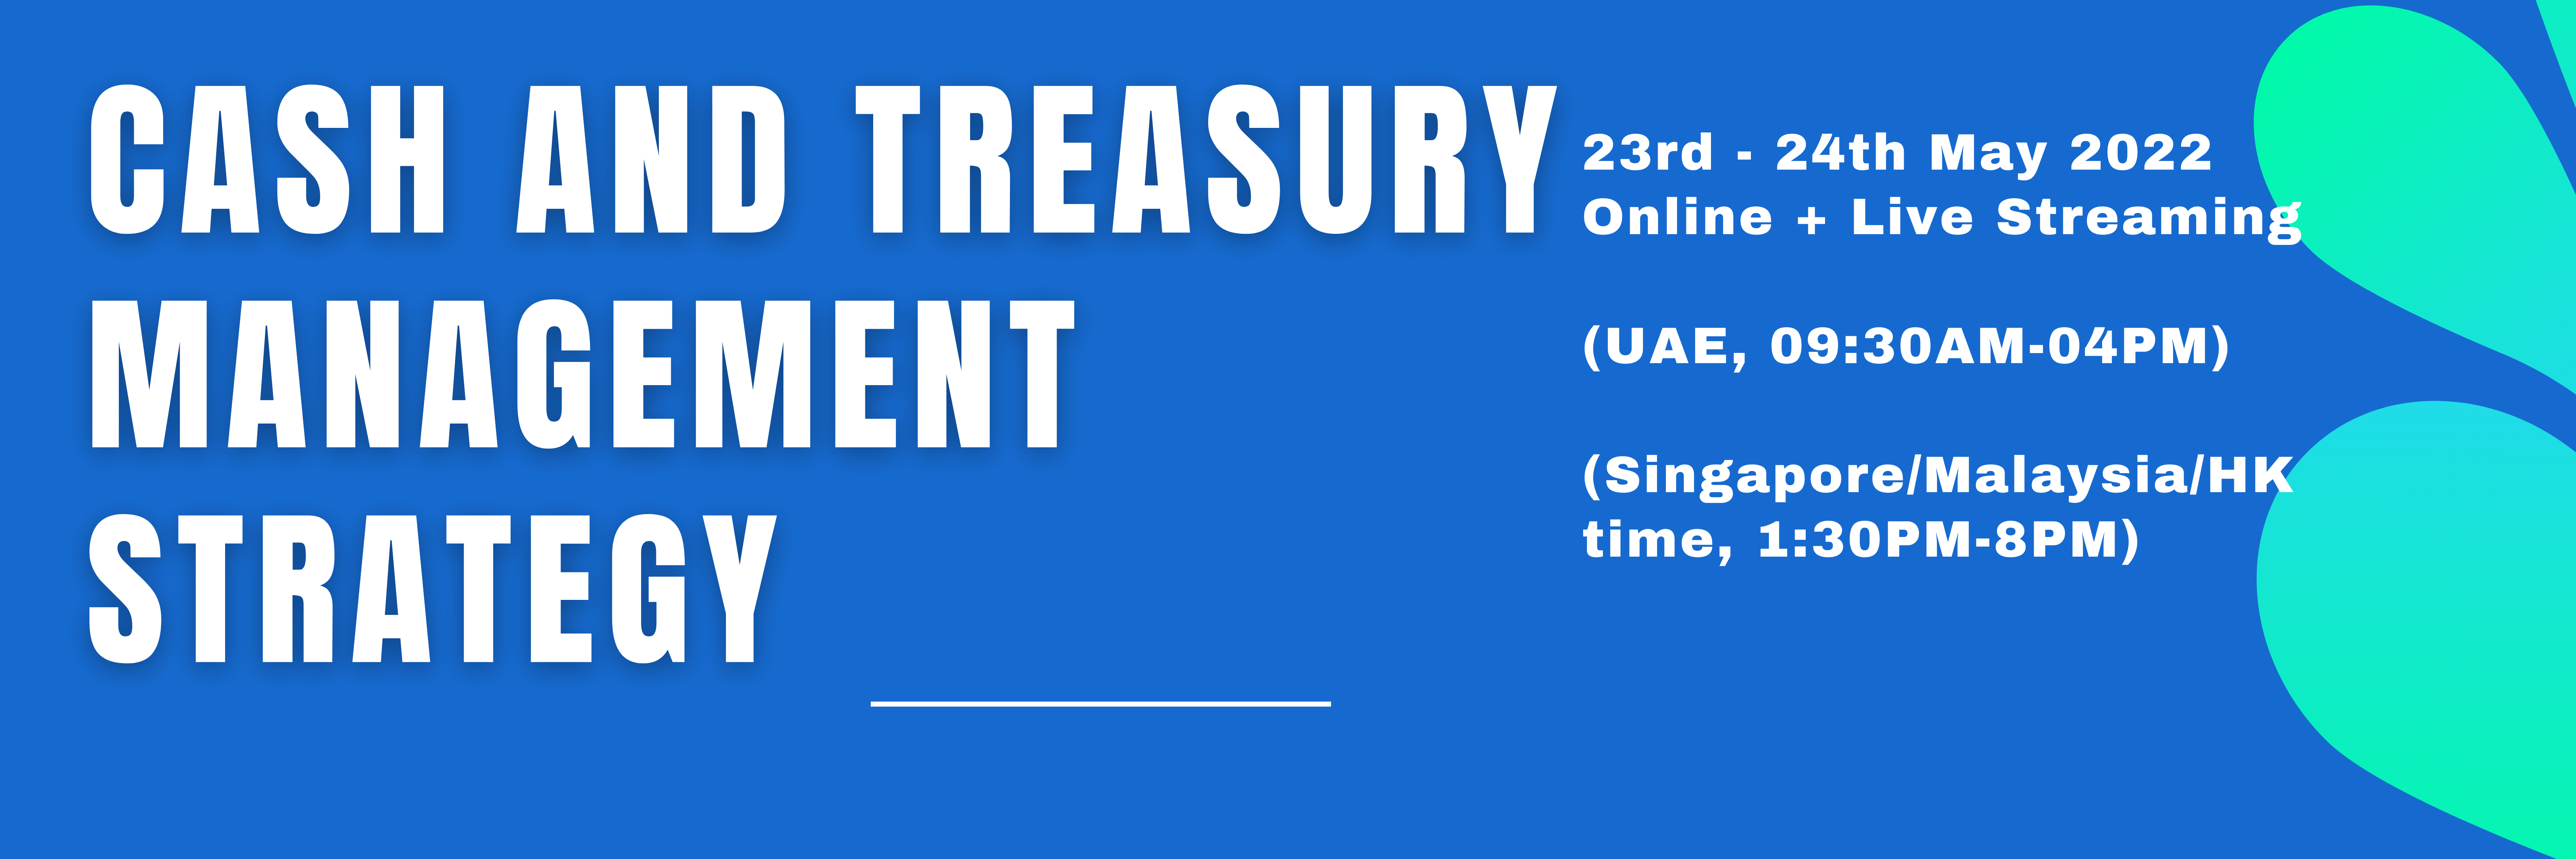 Cash and Treasury Management Strategy